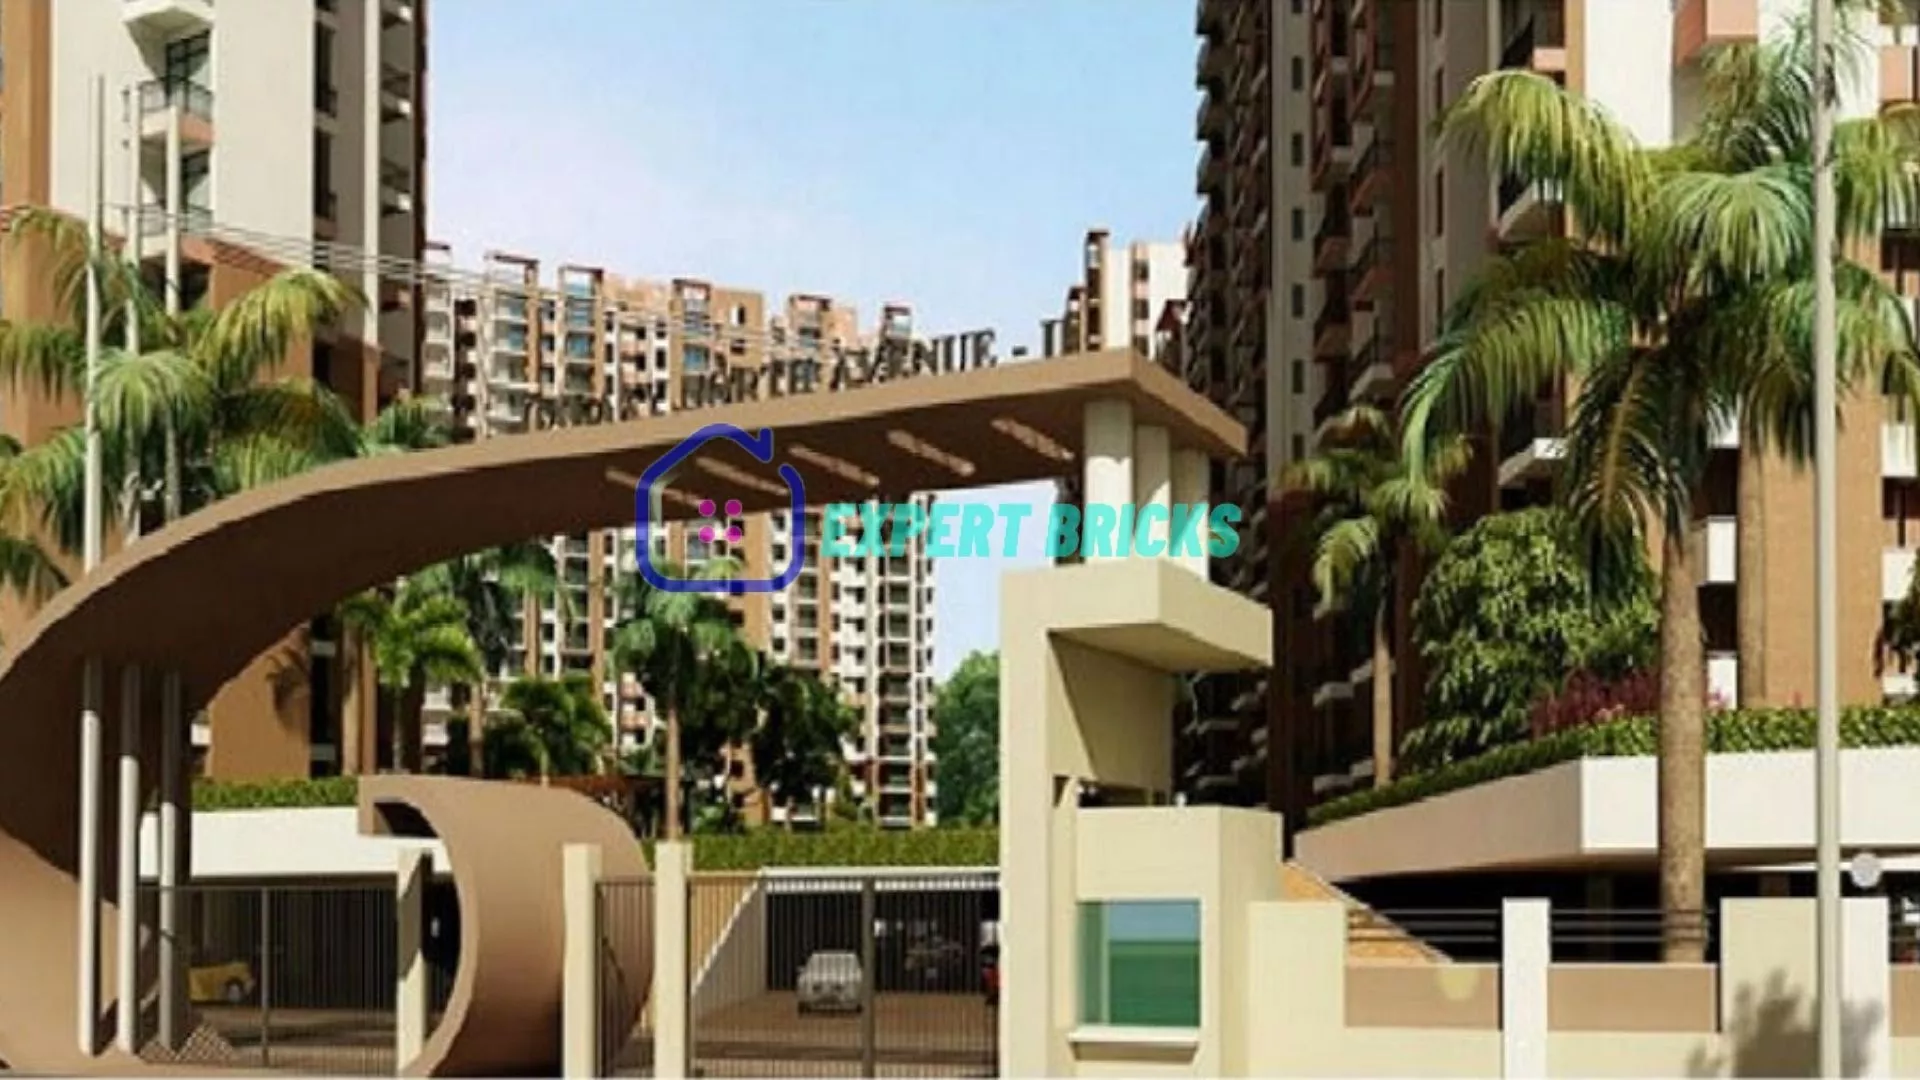 Galaxy North Avenue 2 in noida extension main gate View